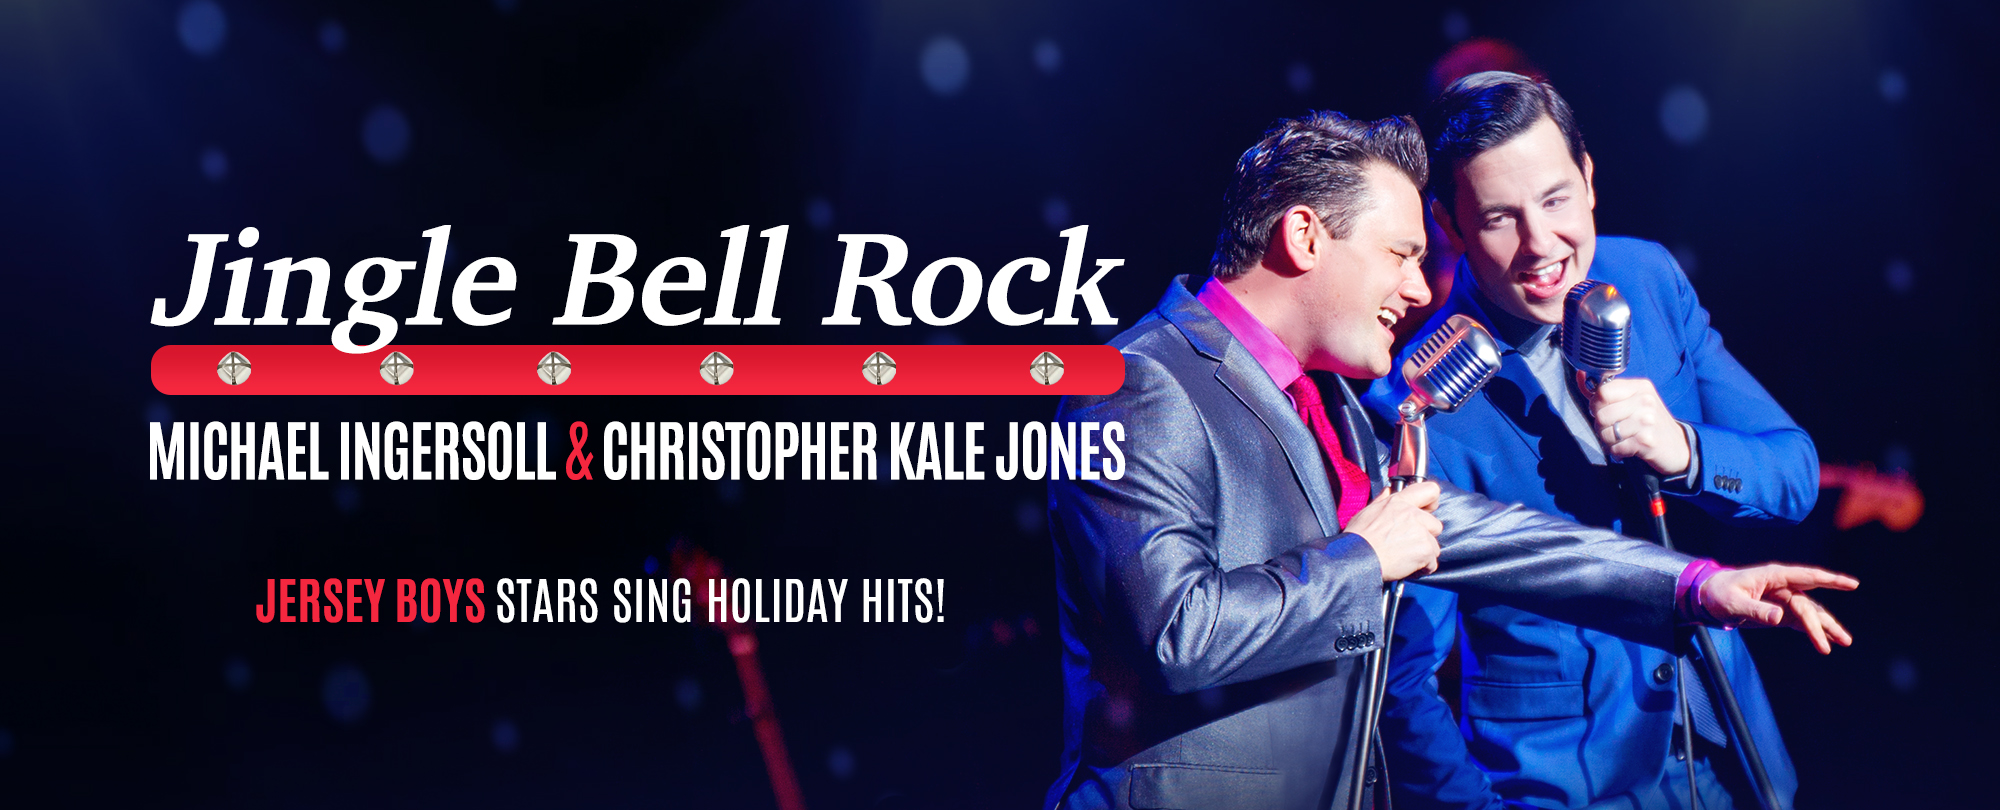 Jingle Bell Rock with Michael Ingersoll and Christopher Kale Jones at Marriott Theatre